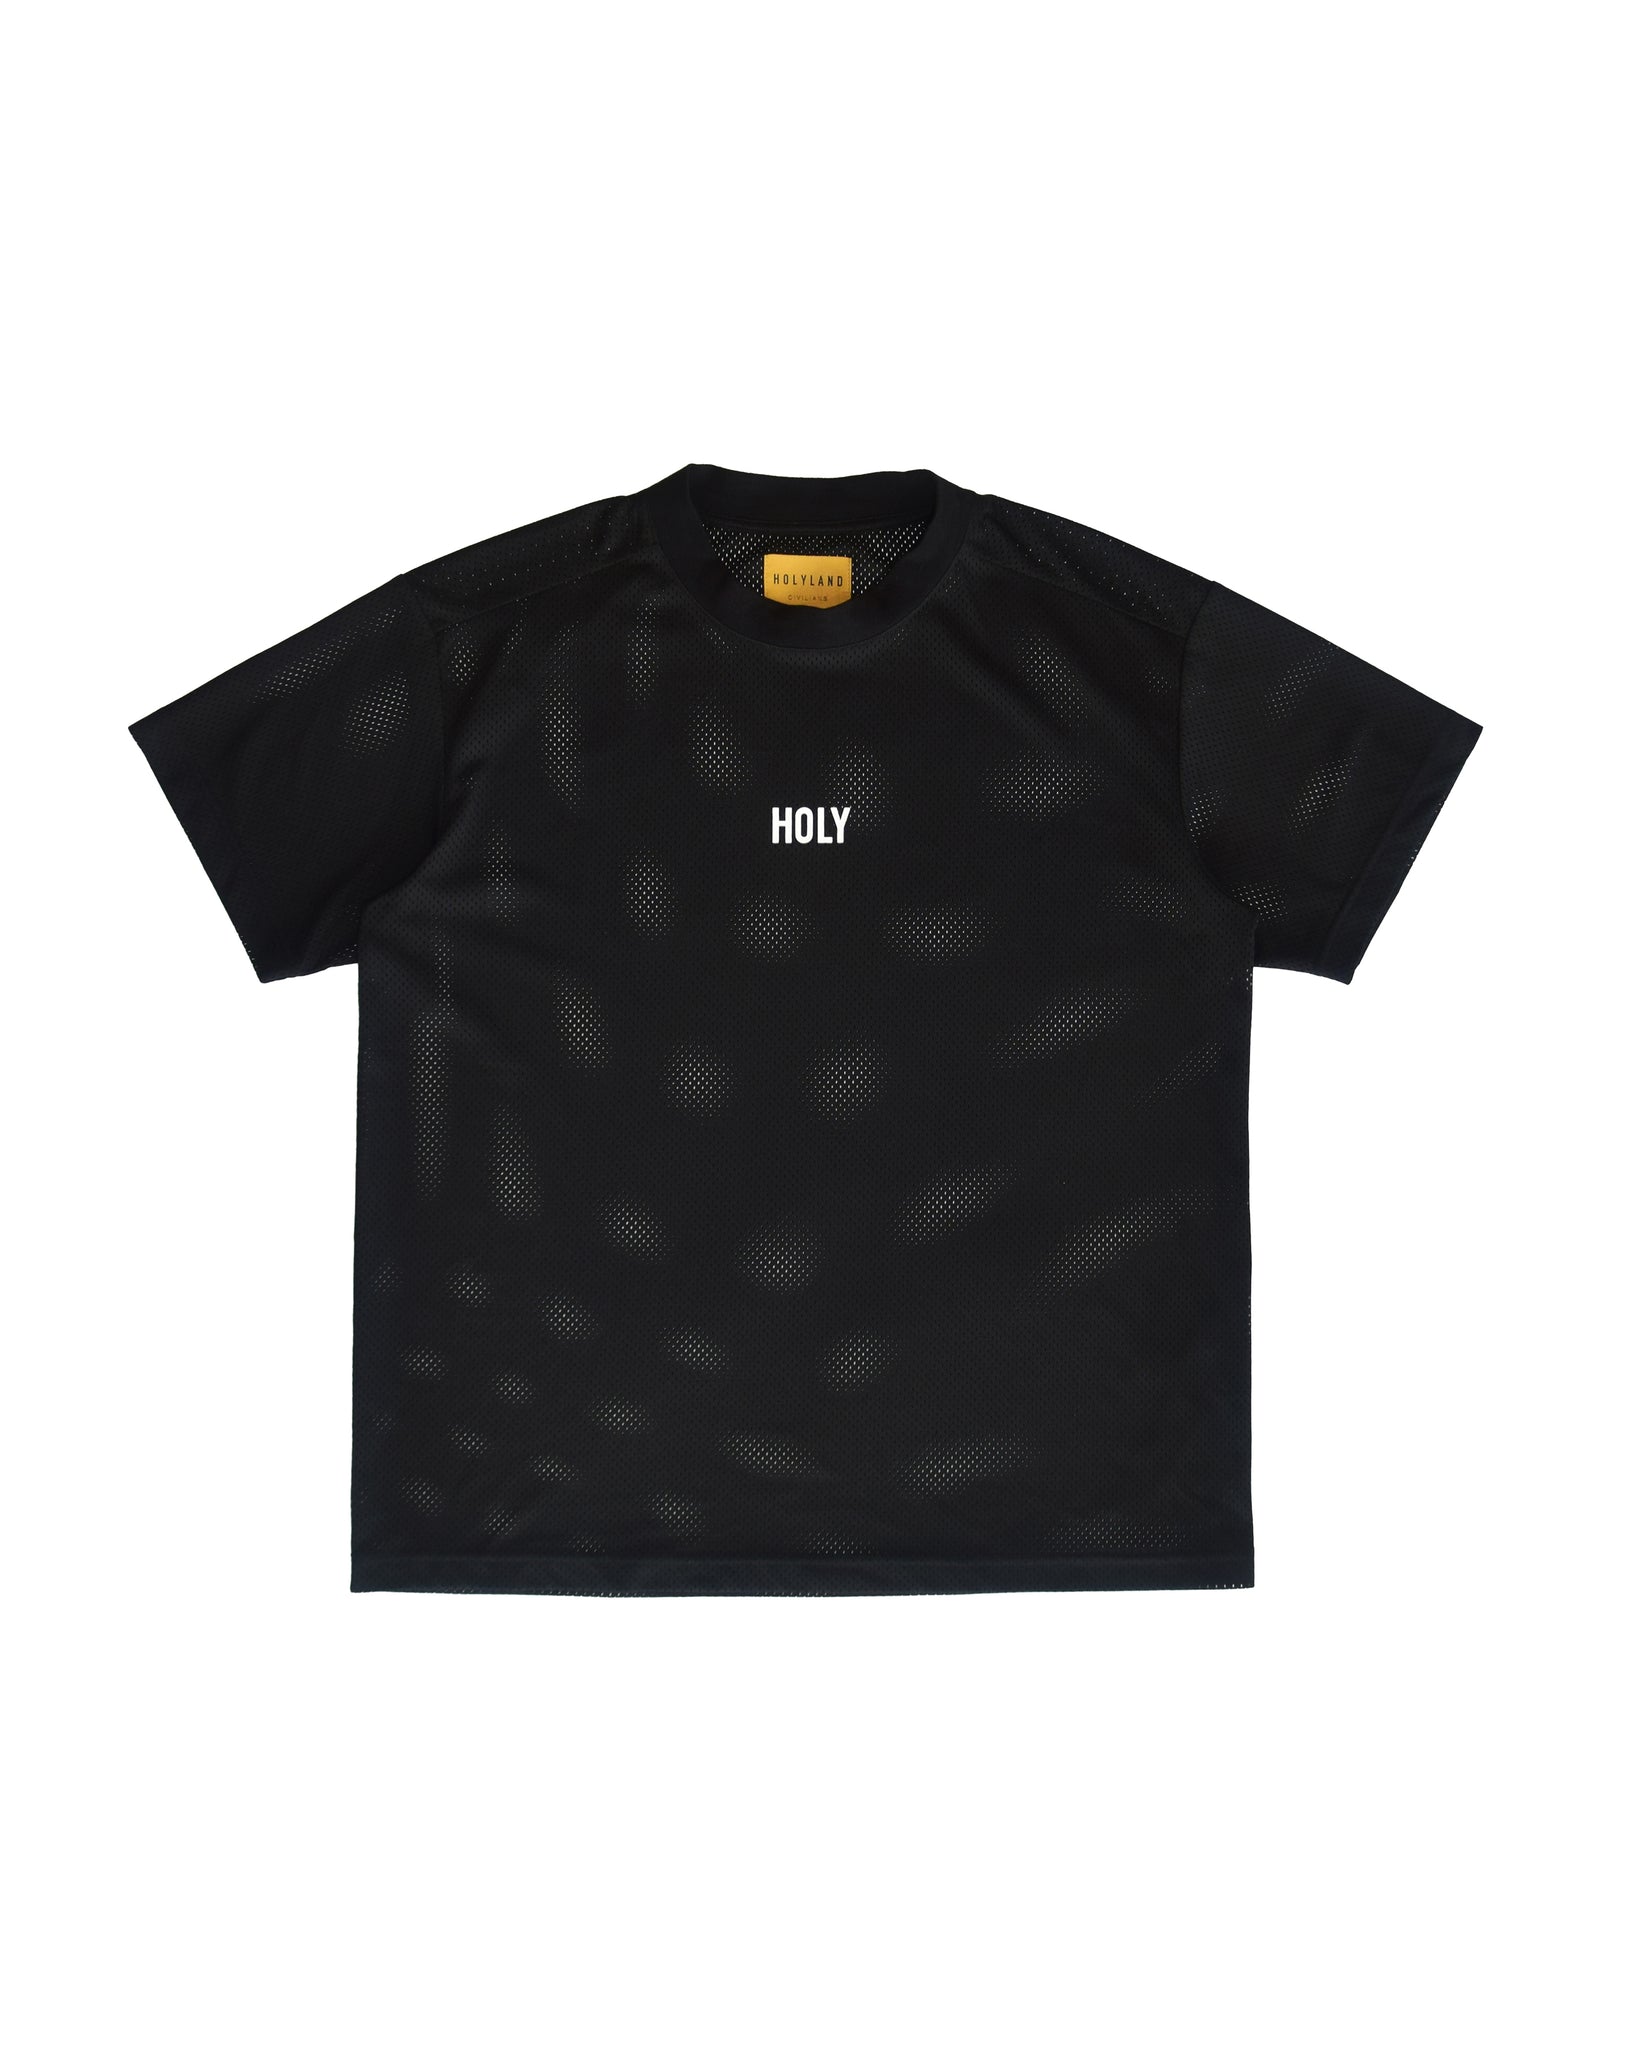 ASTRAL PERFORATED TEE HOLYLAND CIVILIANS IL